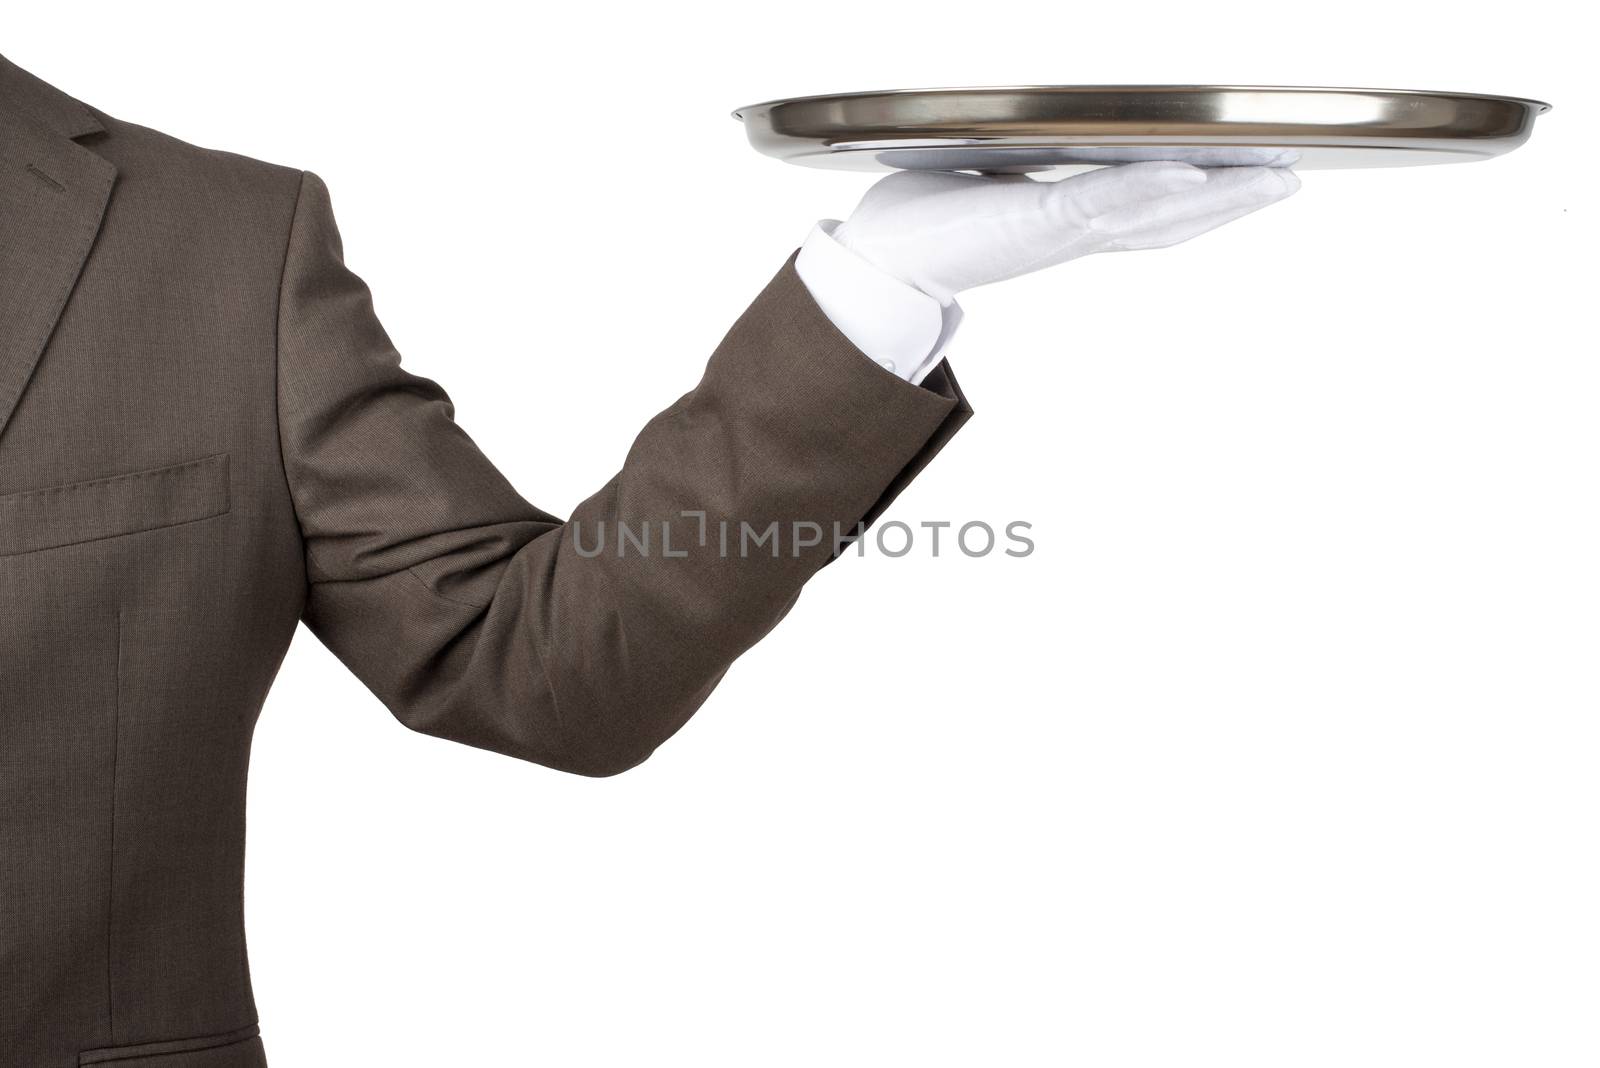 Arm in white glove with empty flat plate isolated on white background